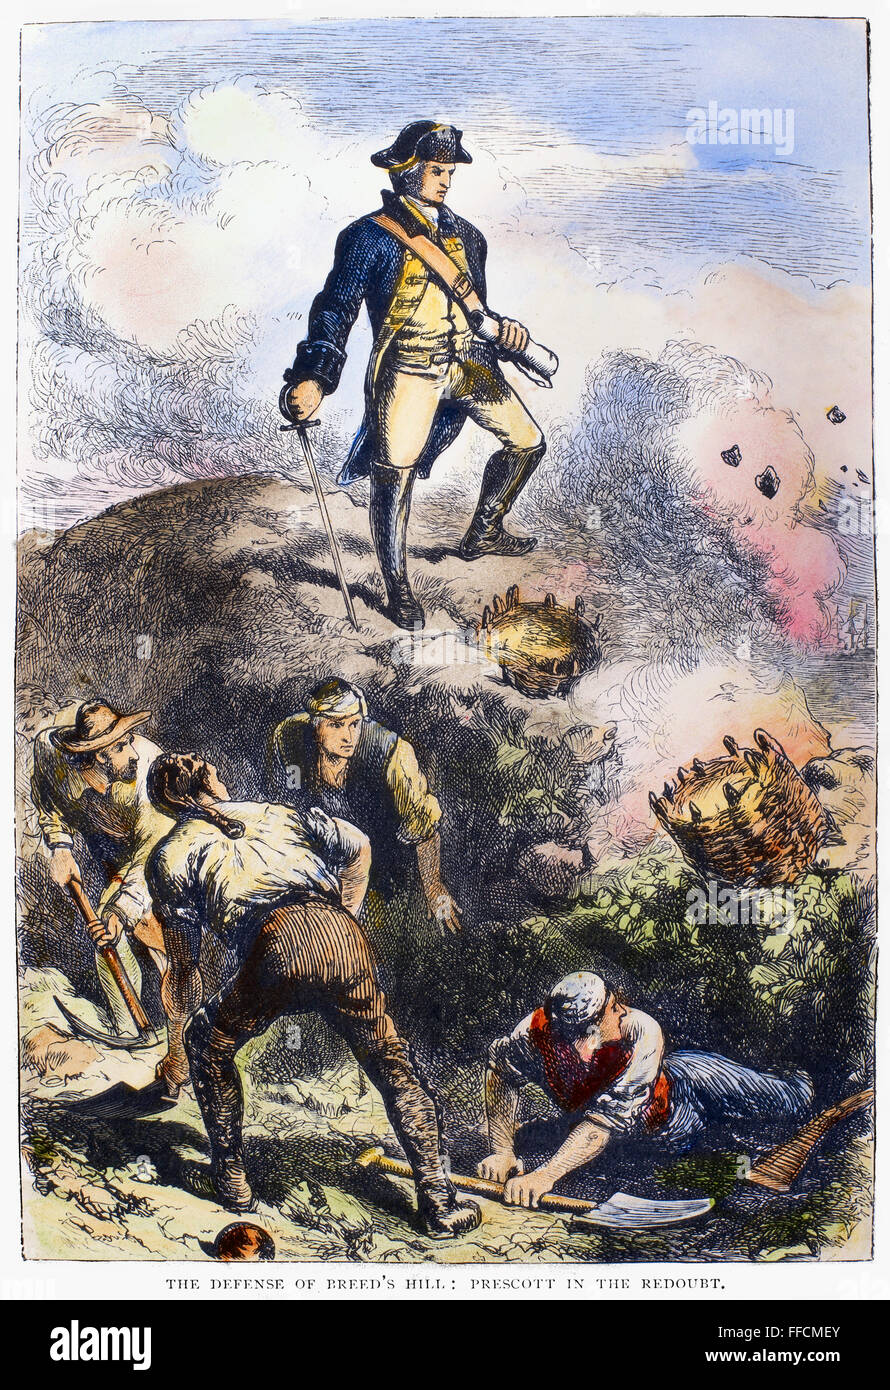 BATTLE OF BUNKER HILL, 1775. /nColonel William Prescott in the redoubt on Breed's Hill during the Battle of Bunker Hill, 17 June 1775. Line engraving, 19th century. Stock Photo